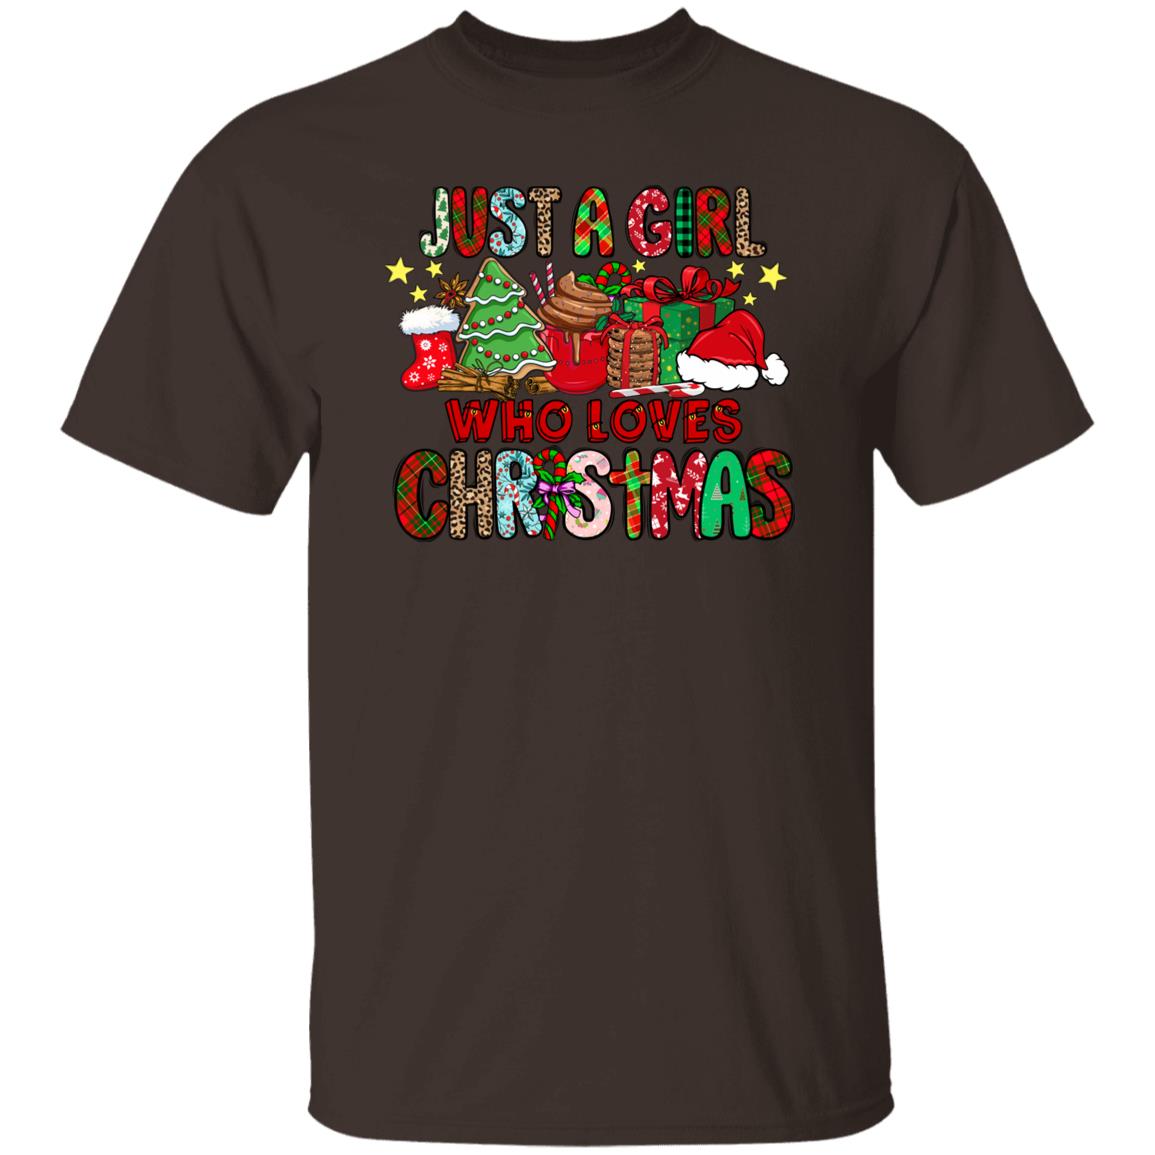 Just a Girl Who Loves Christmas Shirt